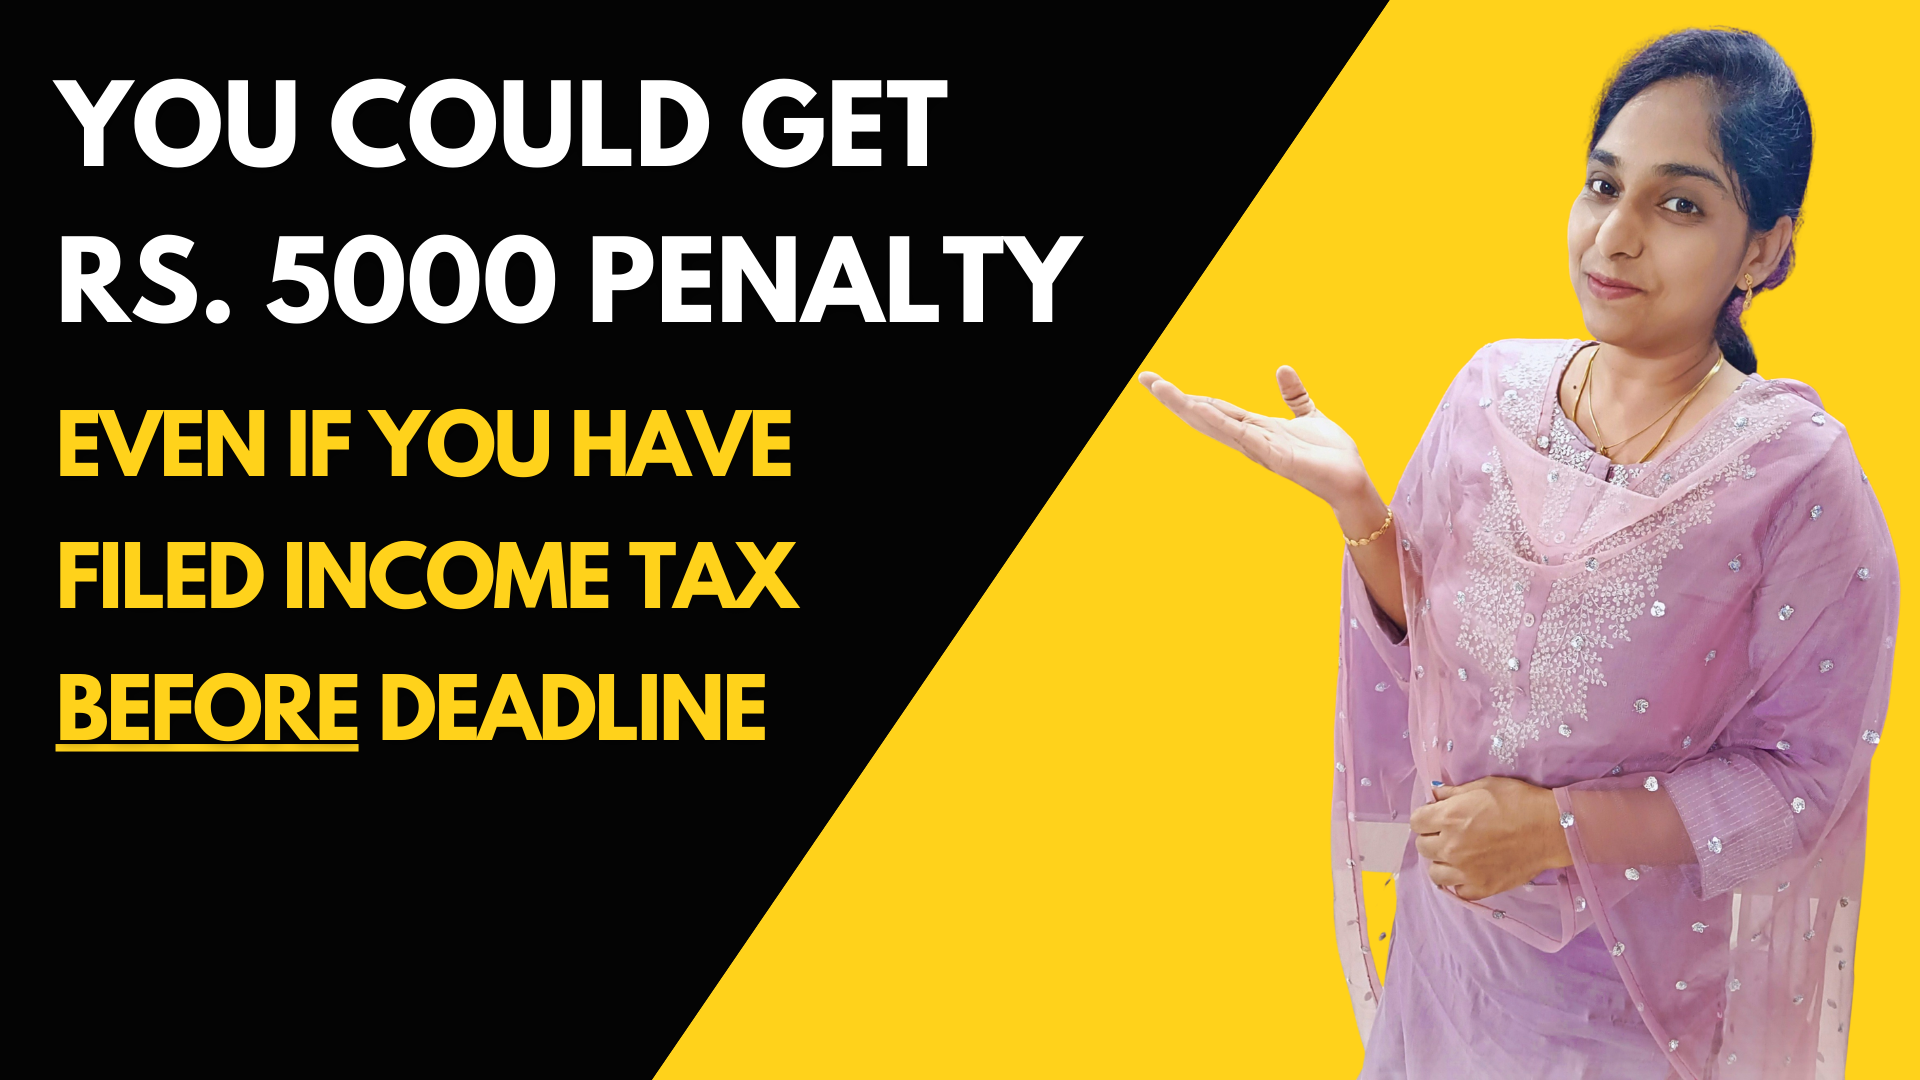 You Could Get Rs. 5000 Penalty Even If You Have Filed IT Before Deadline | Details